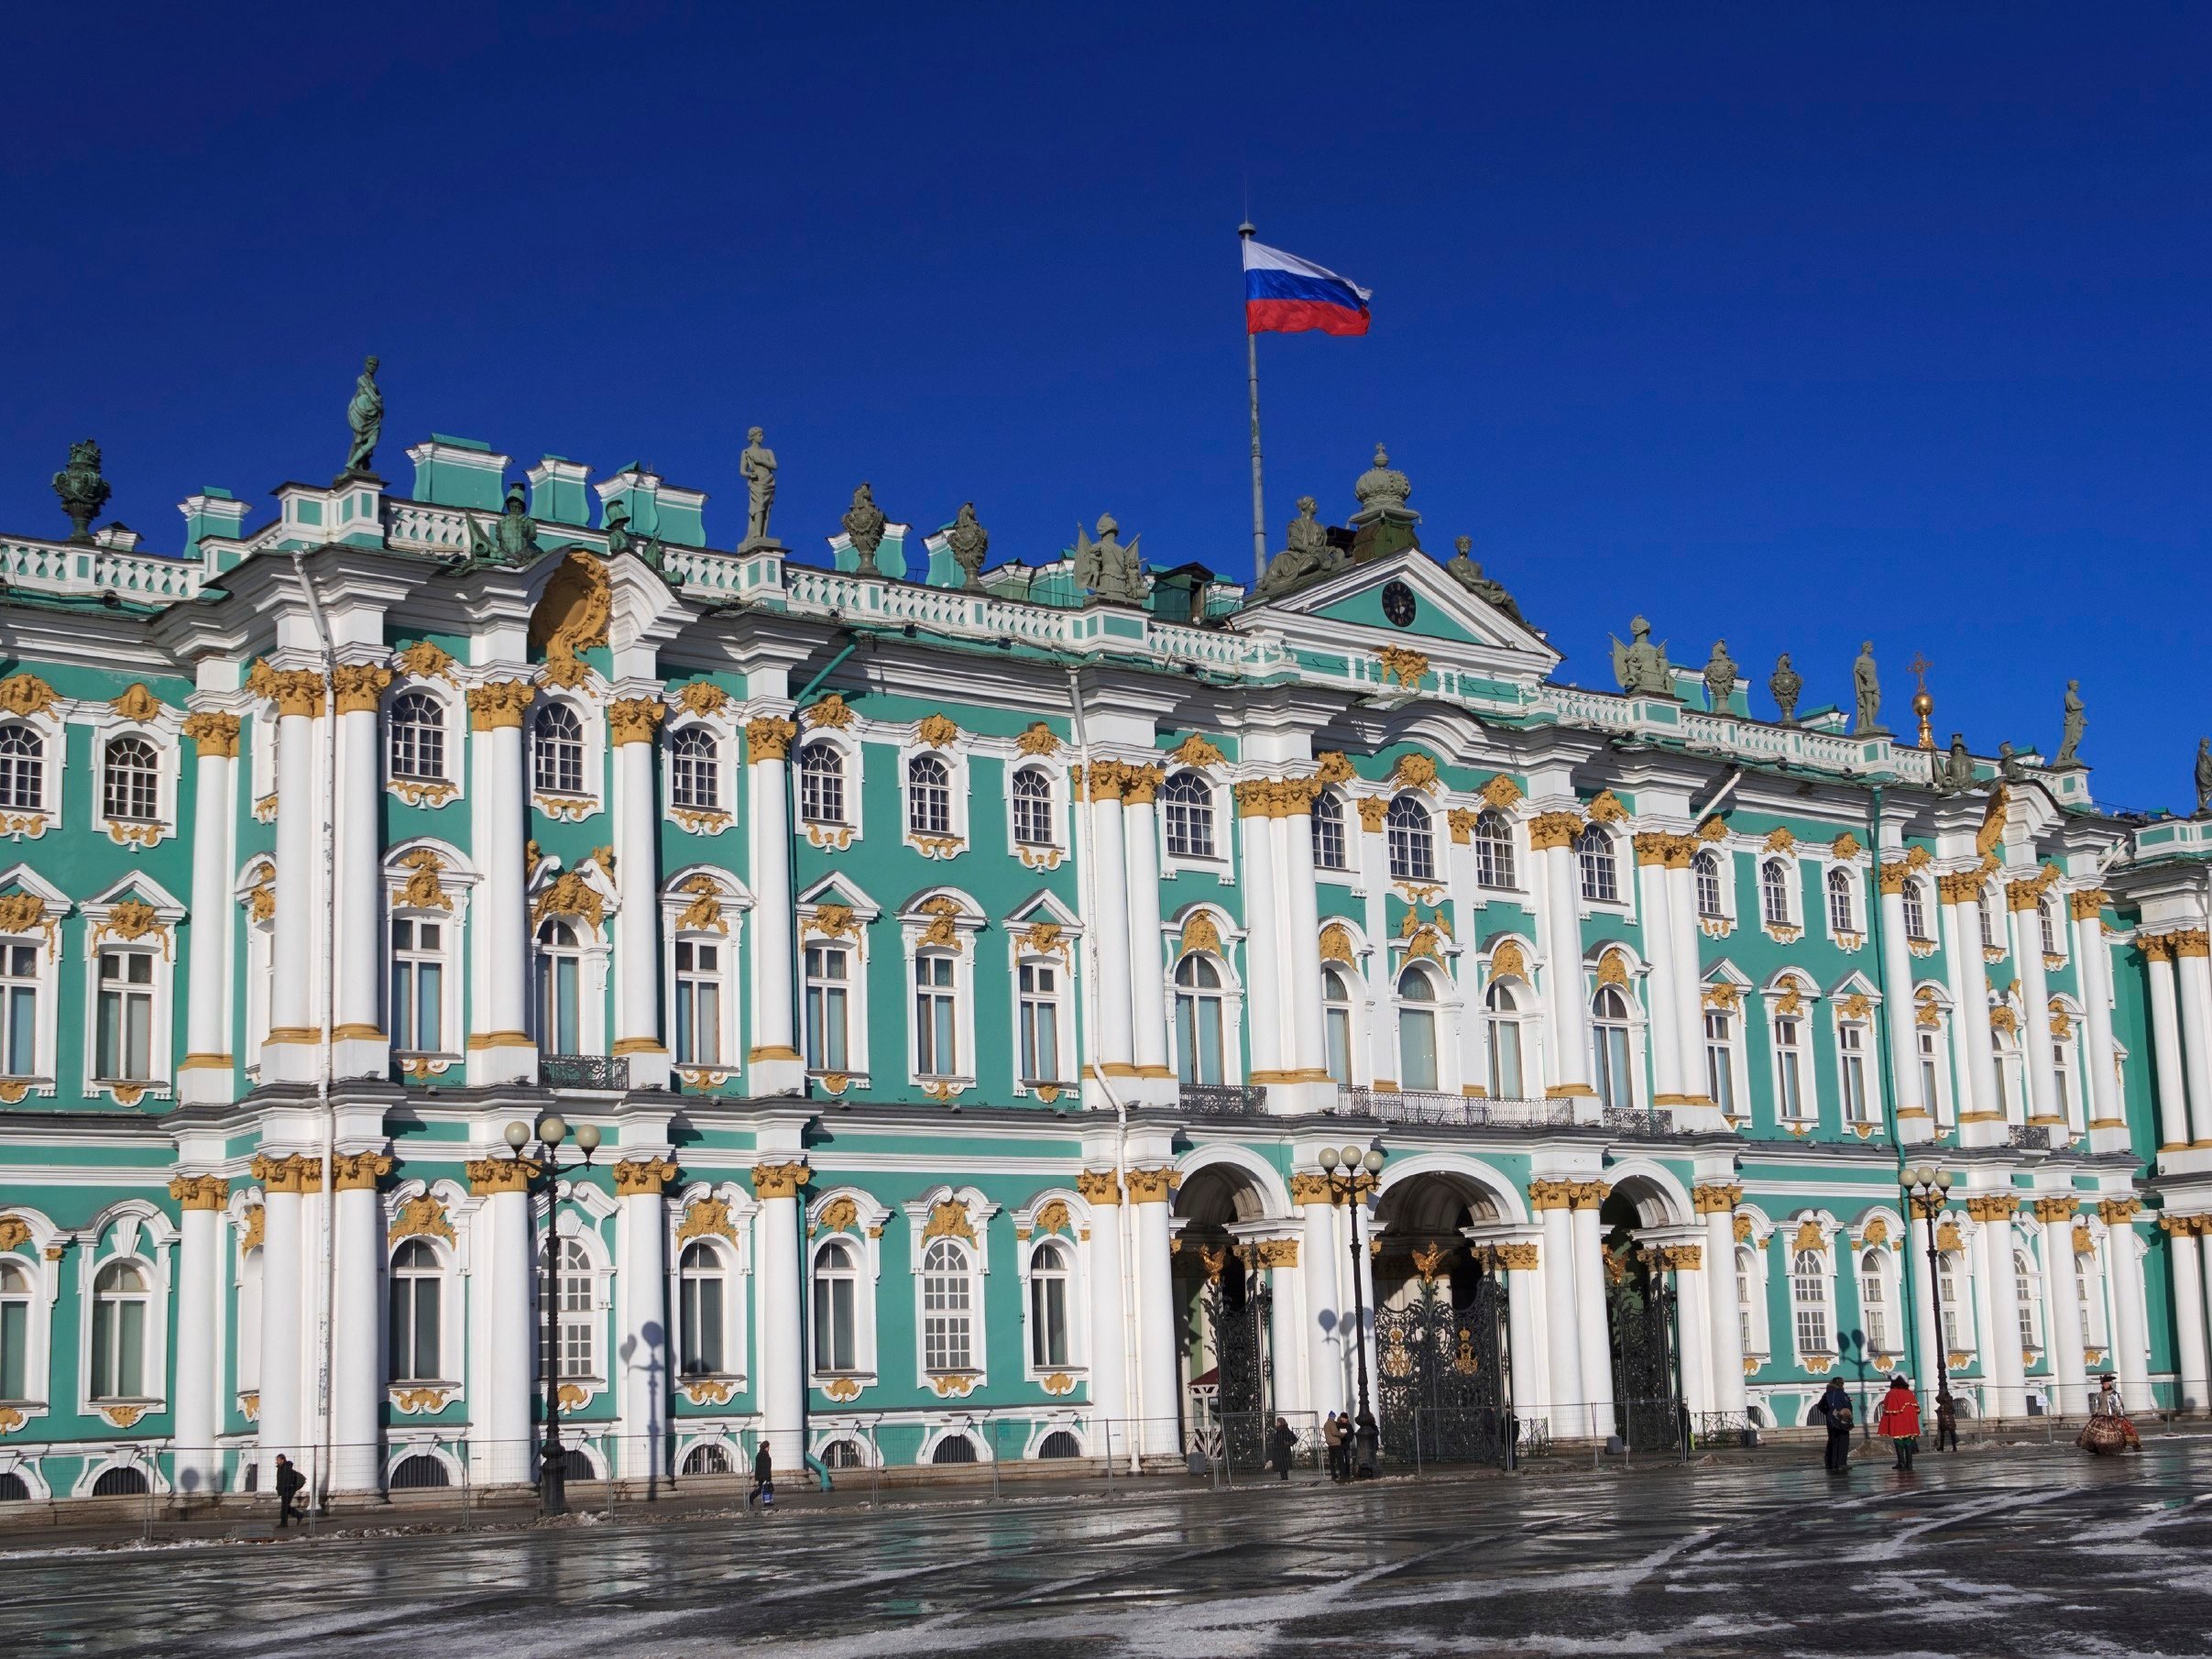 The Hermitage - St. Petersburg, Russia